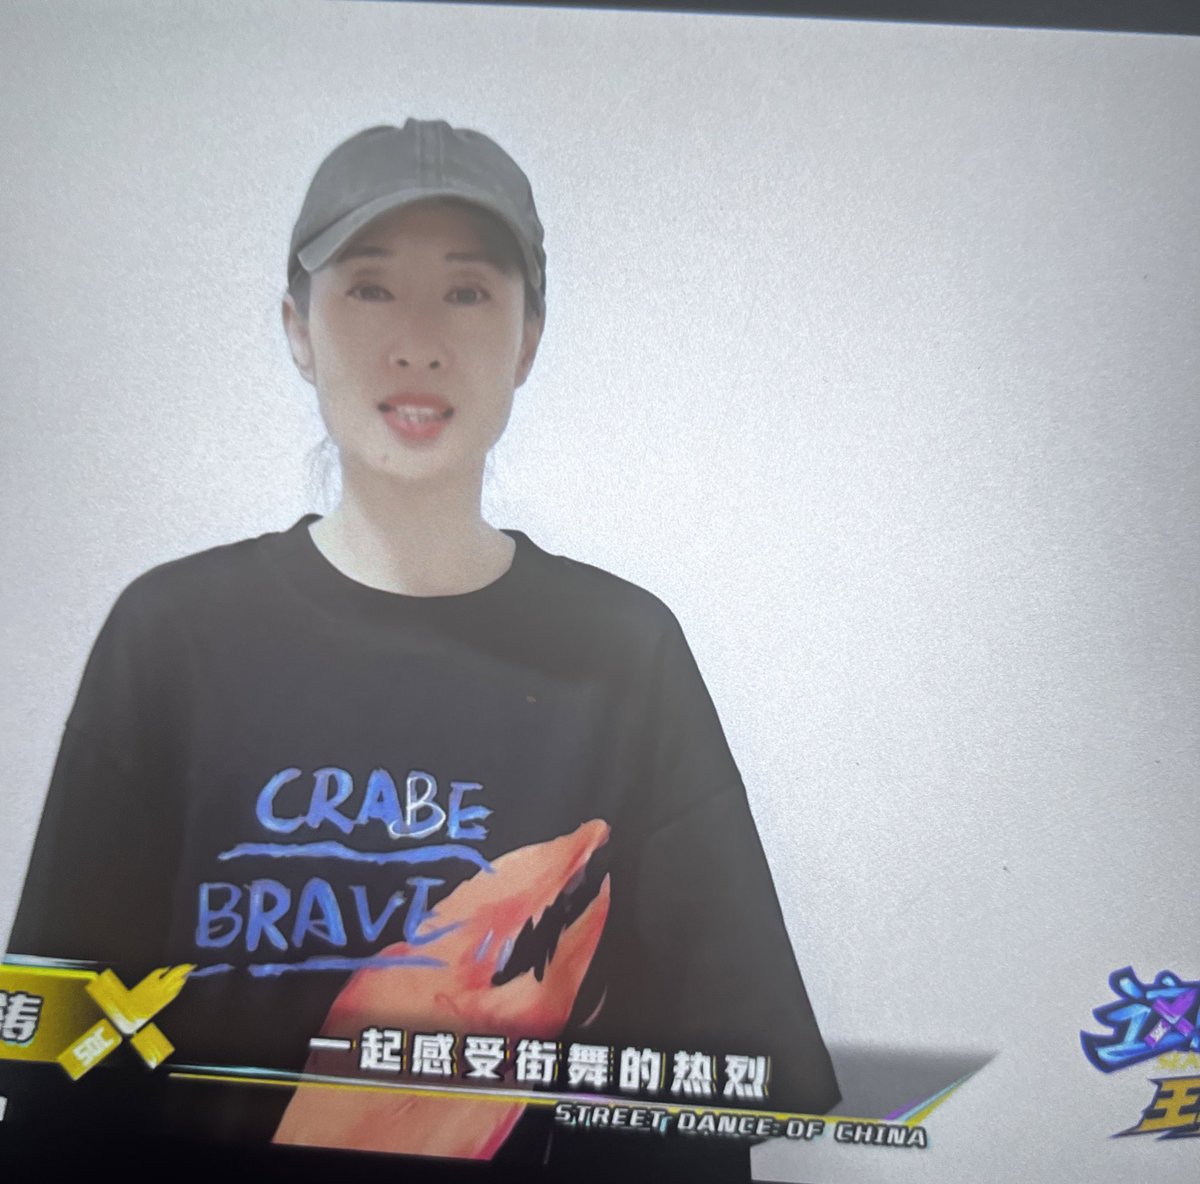 OMG Liu Mintao laoshi who play Chen Shuo’s mom in One And Only send the short video for SDC6, she said: “I heard that our Chen Shuo also came to the scene” 😭😭😭😭😭😭😭😭

CAPTAIN YIBO COMEBACK
#WangYibo_SDC6Final #SDC6FINAL
#WangYibo